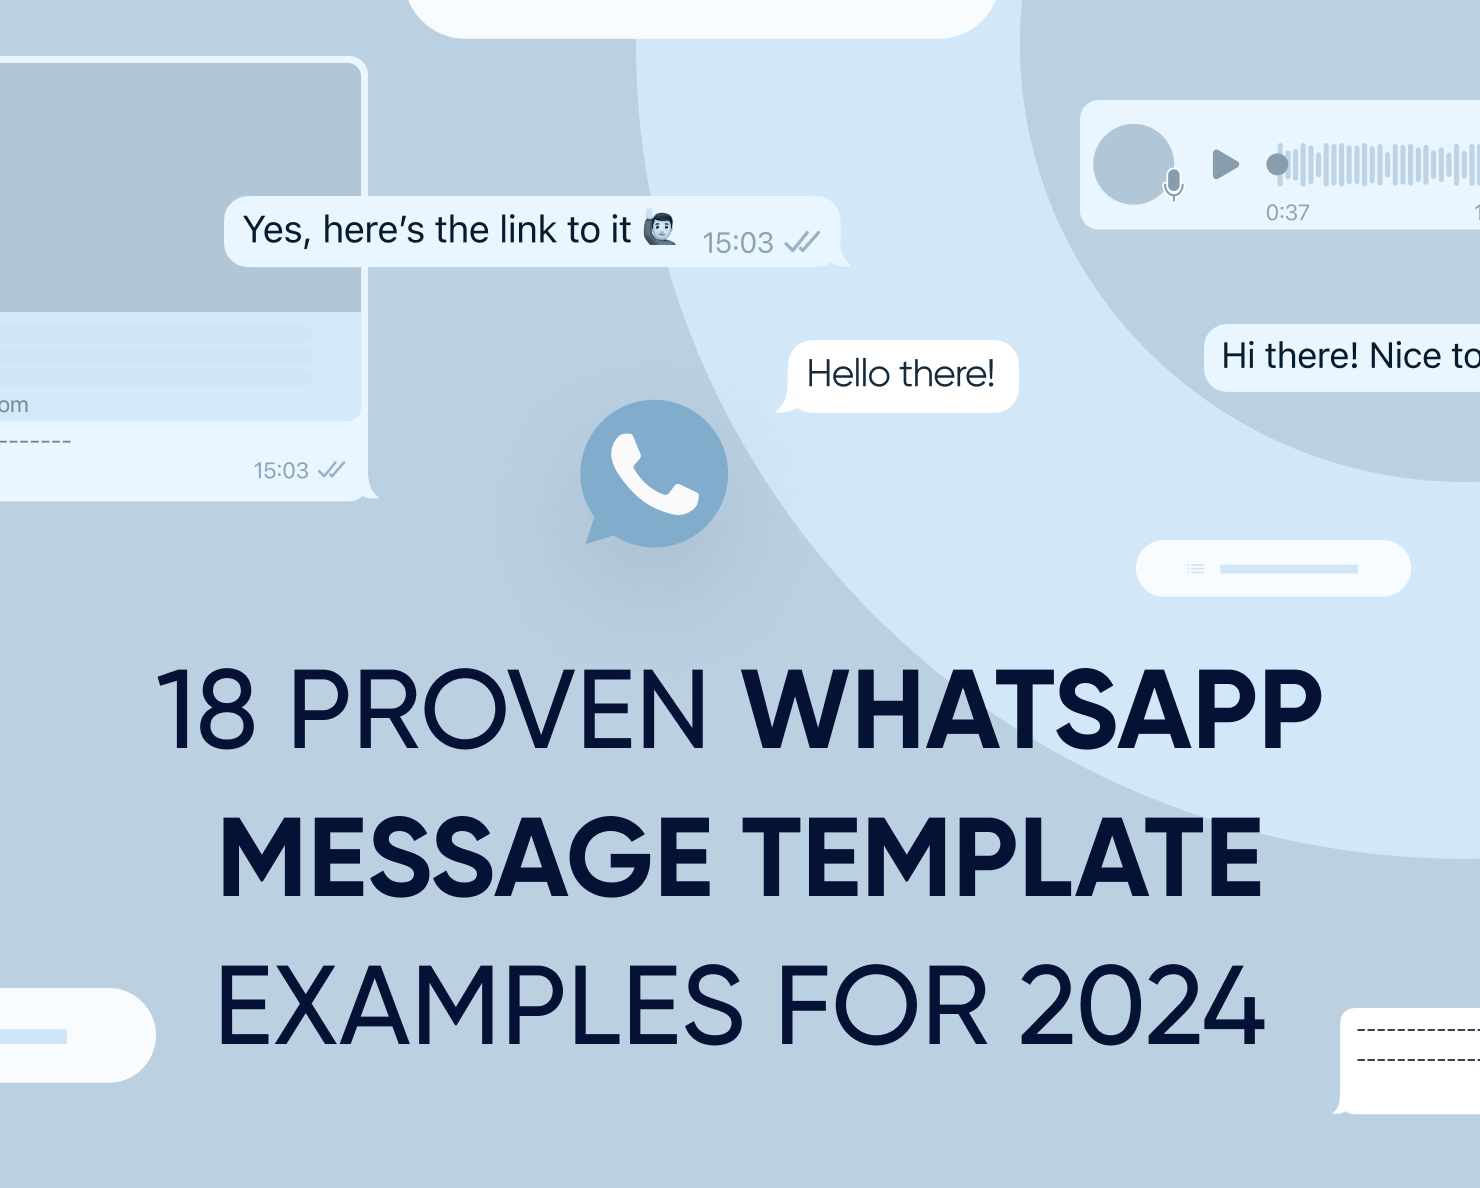 18 Proven WhatsApp message template examples for 2024 Featured Image